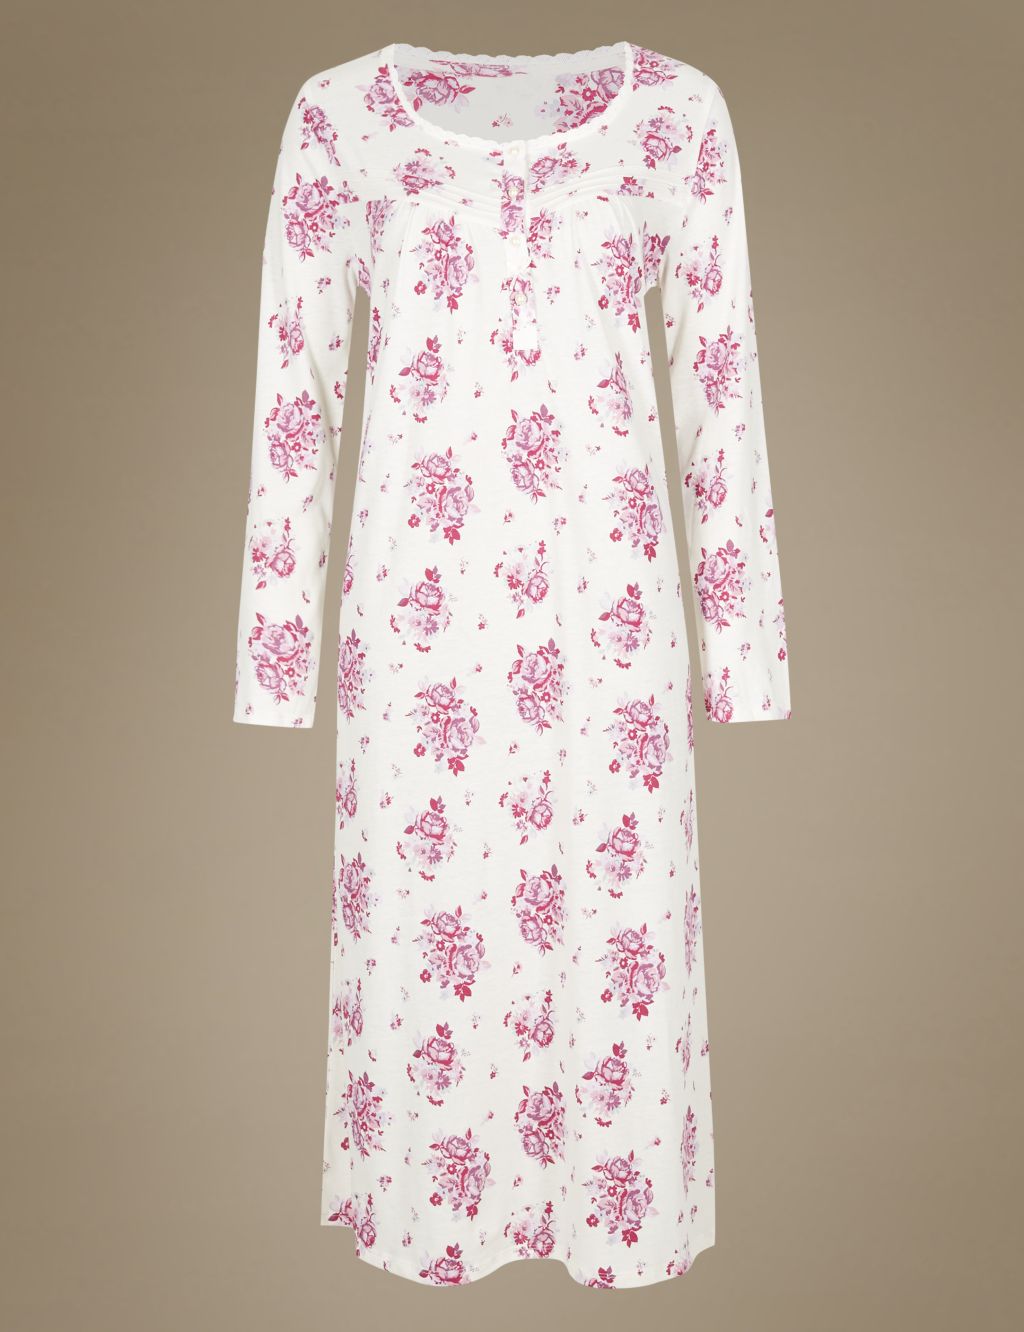 Floral Print Nightdress 1 of 6